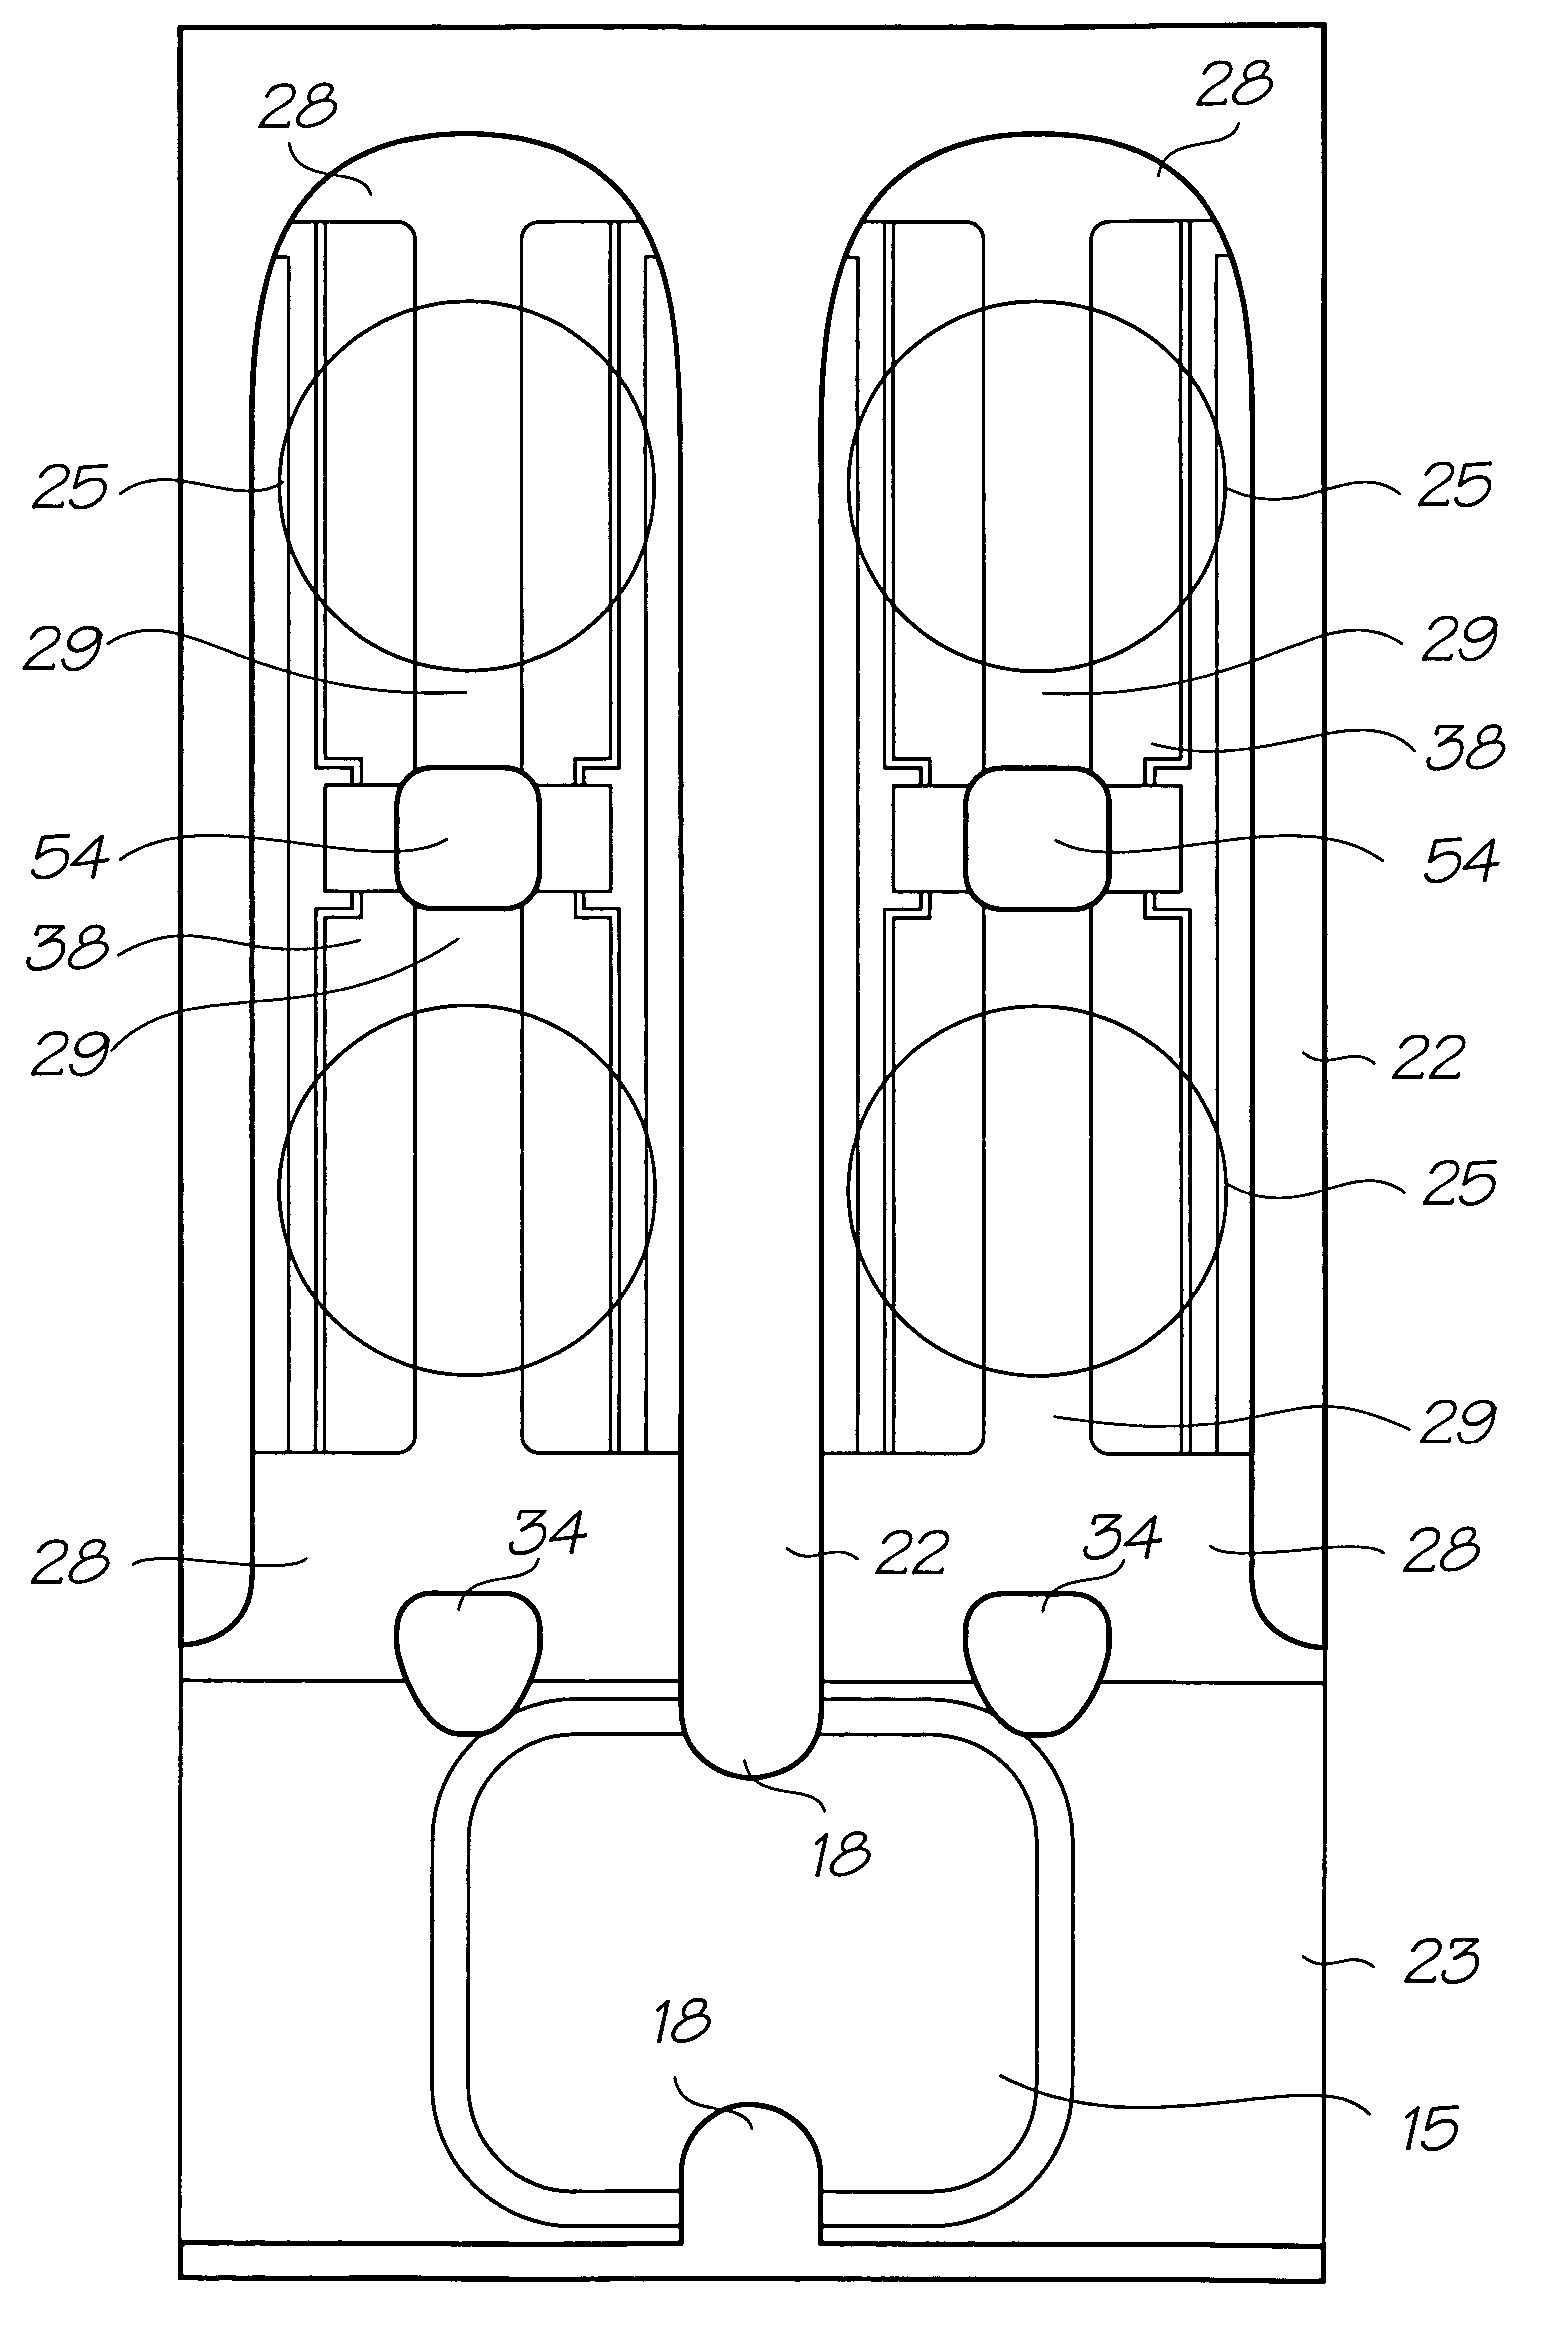 Inkjet printhead with multi-nozzle chambers